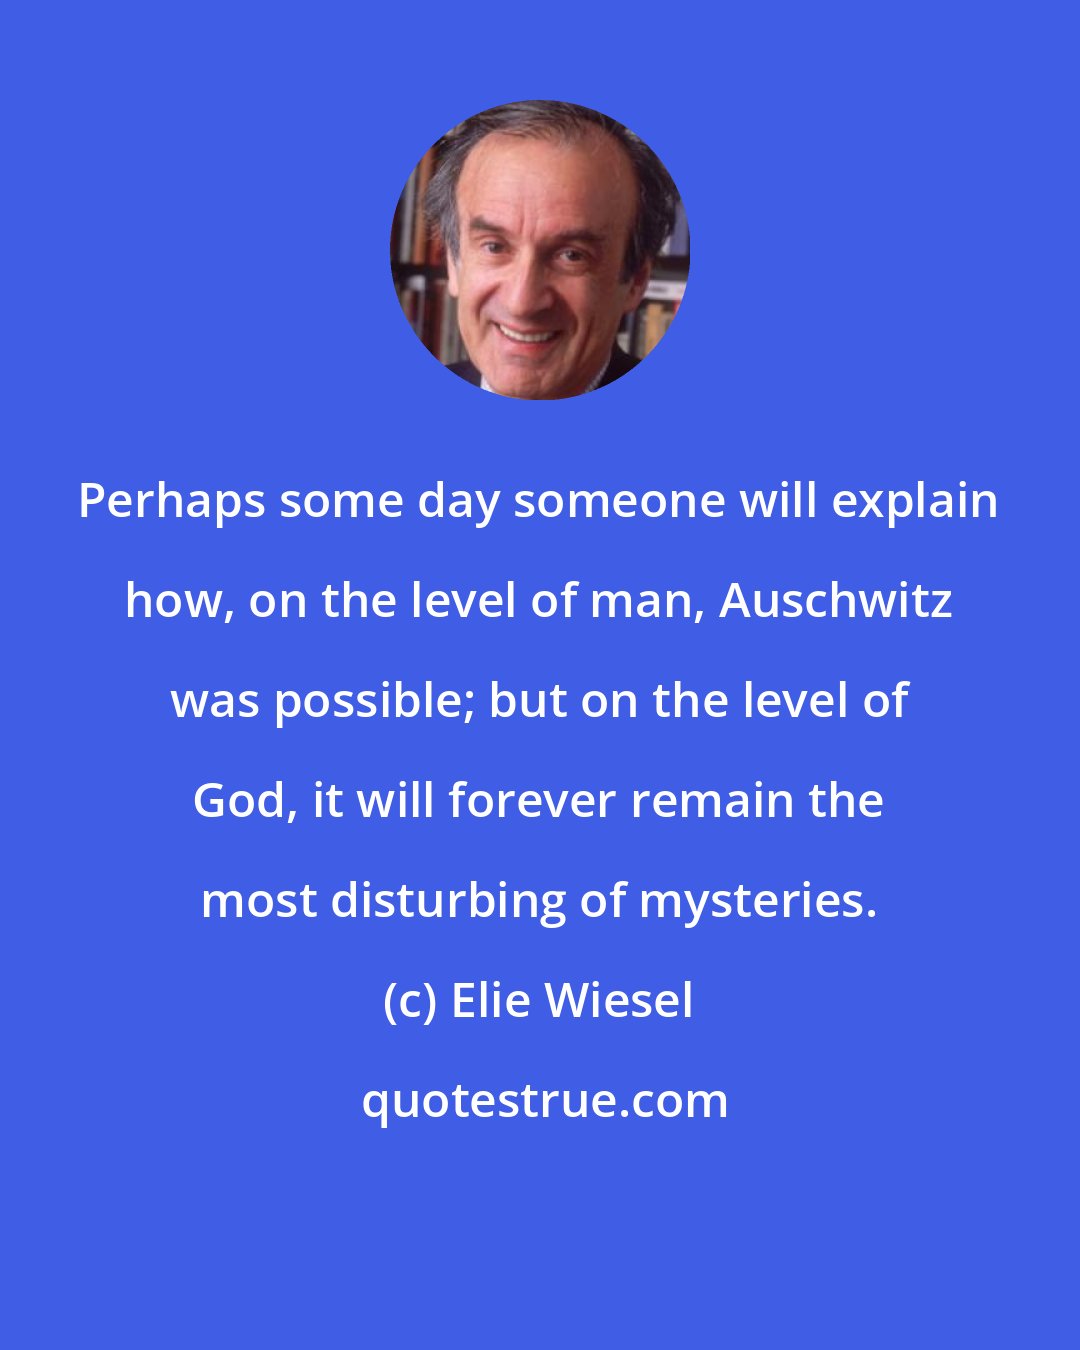 Elie Wiesel: Perhaps some day someone will explain how, on the level of man, Auschwitz was possible; but on the level of God, it will forever remain the most disturbing of mysteries.